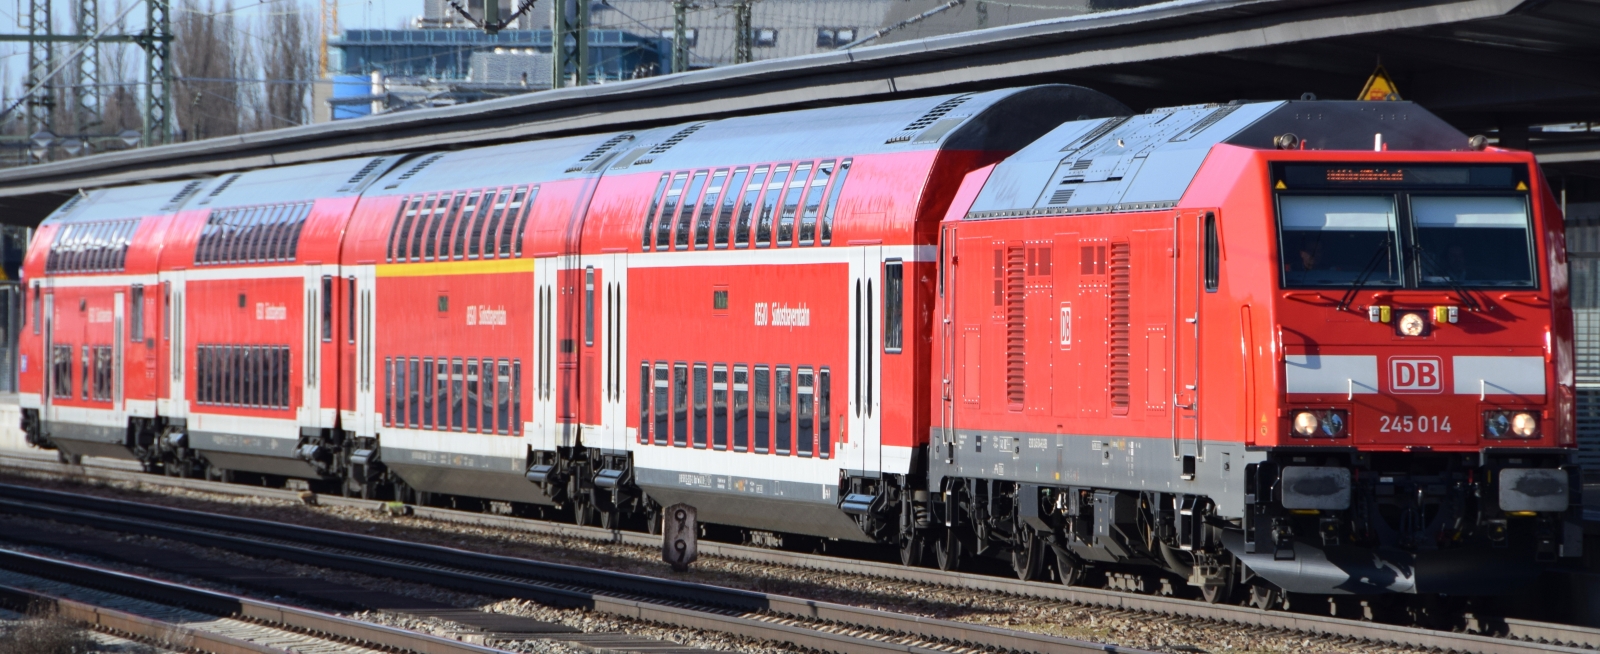 245 014 with a double-deck train at Munich-East station